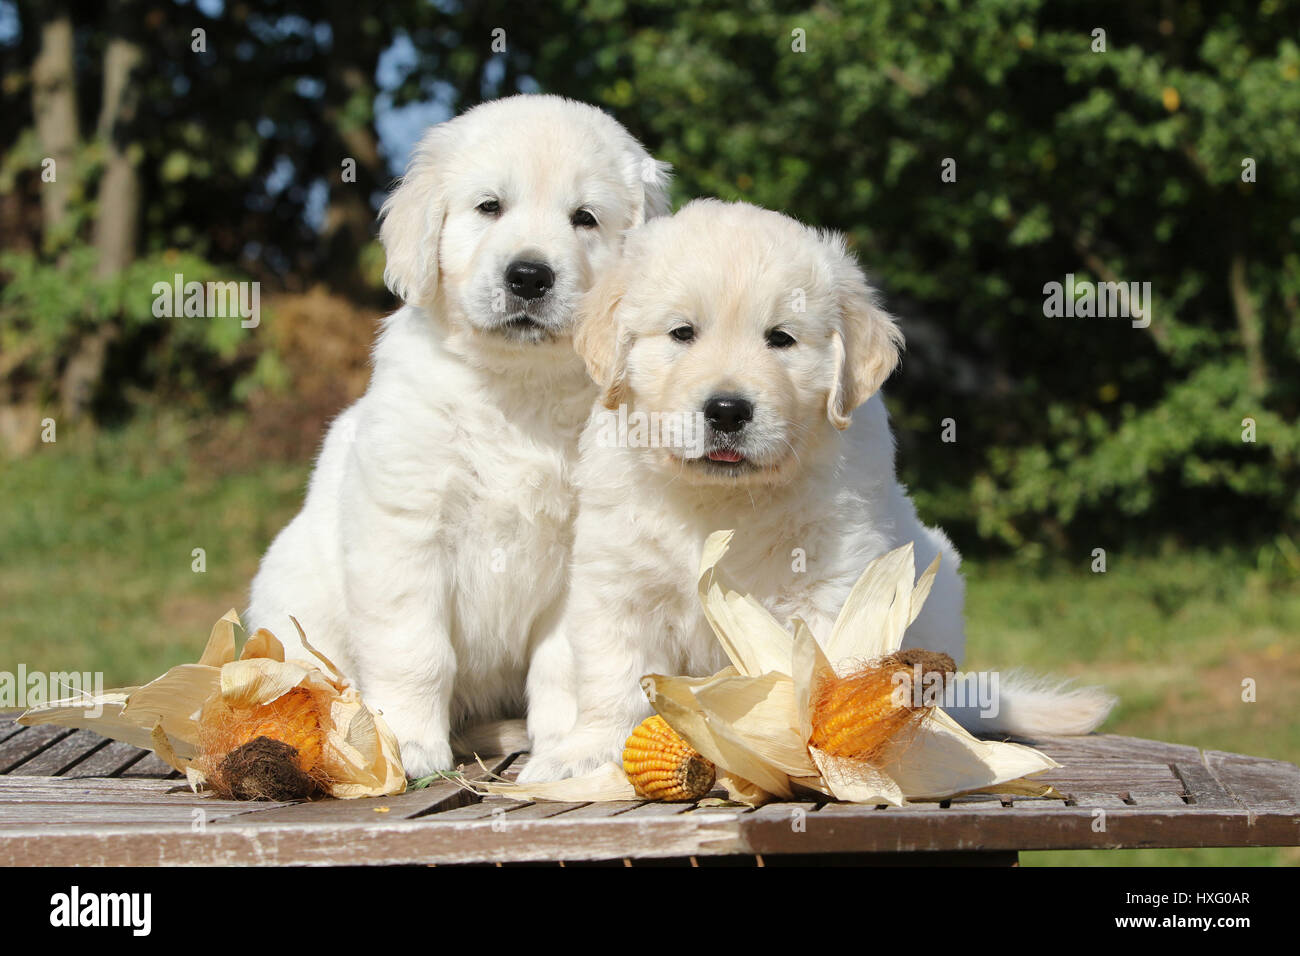 Golden Retriever. Pair of puppies (7 weeks old) sitting next to corncobs on a garden table. Germany Stock Photo